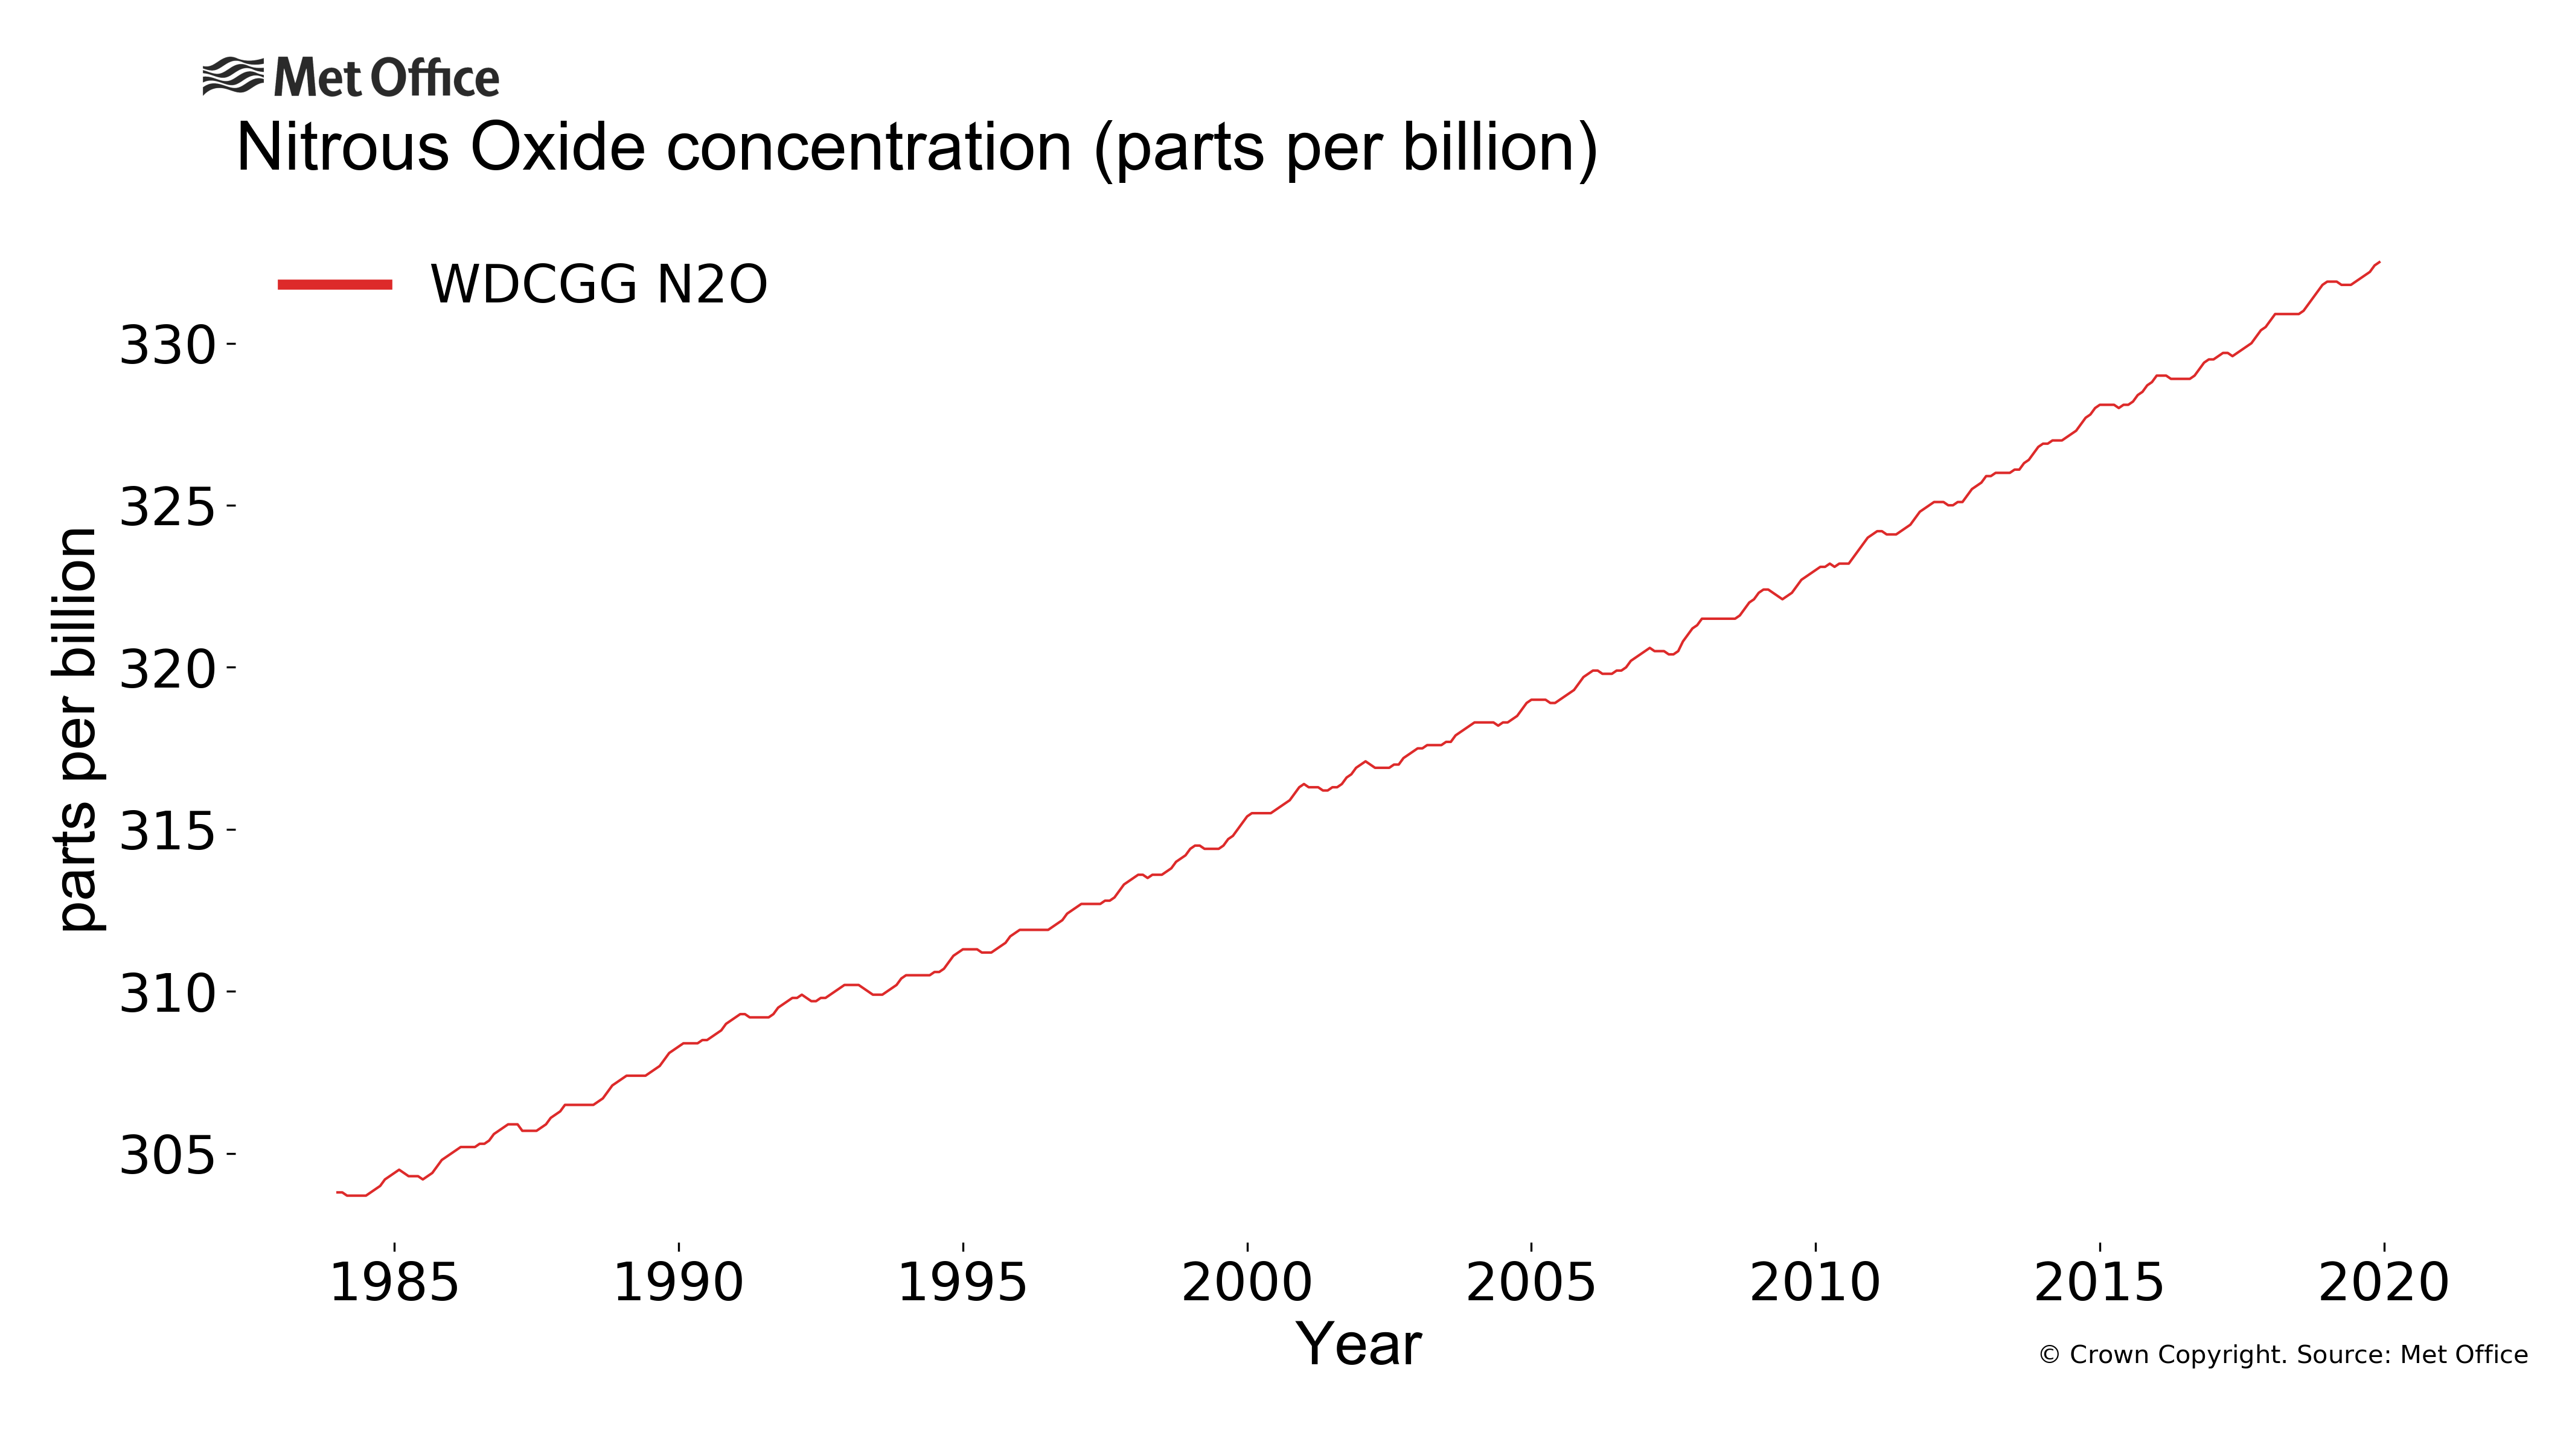 
Monthly nitrous oxide concentration in the atmosphere
